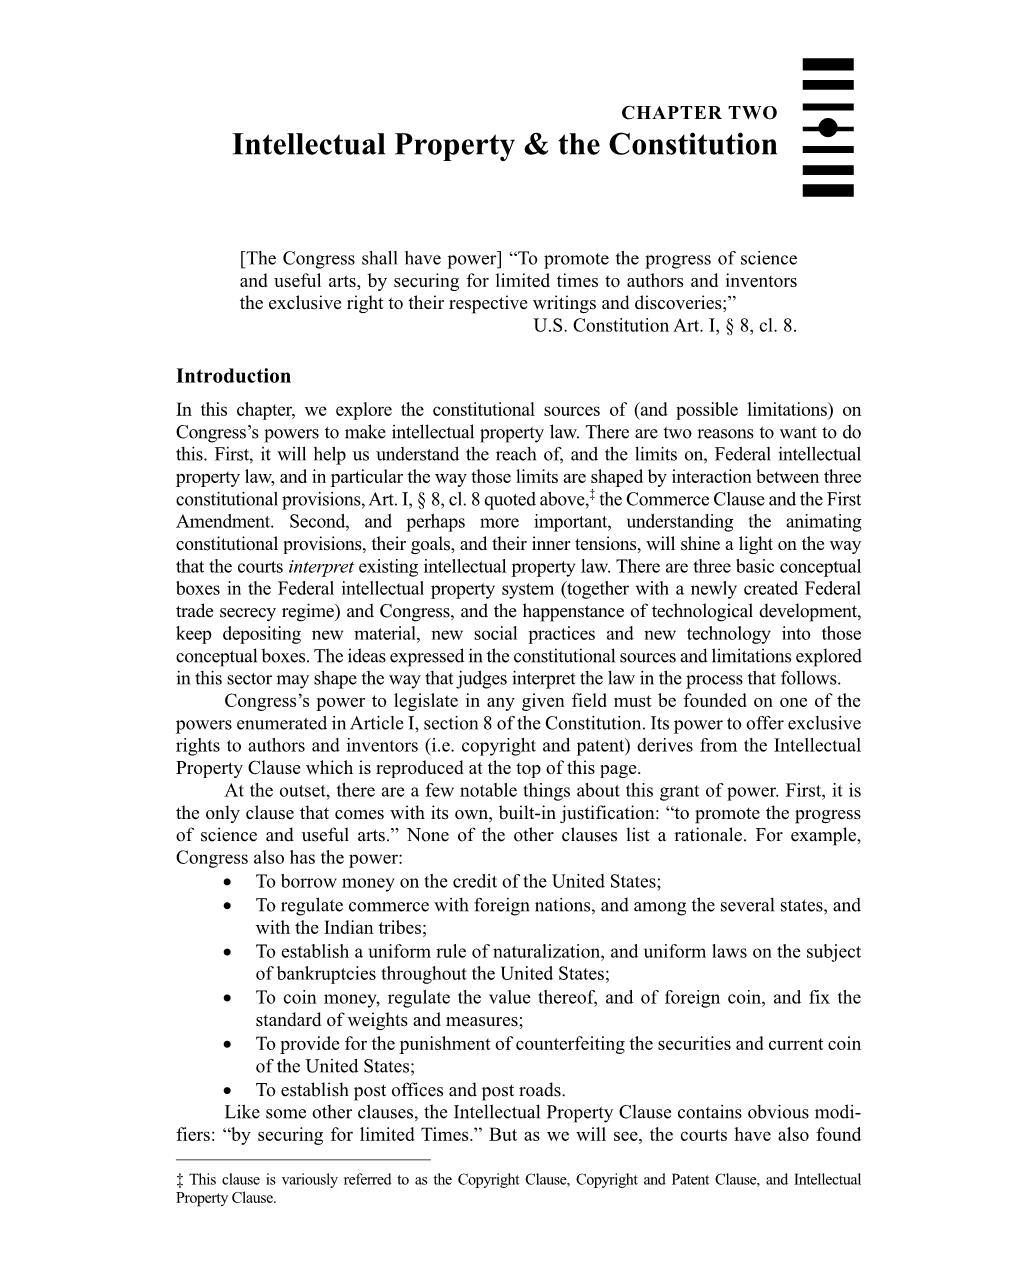 Intellectual Property & the Constitution